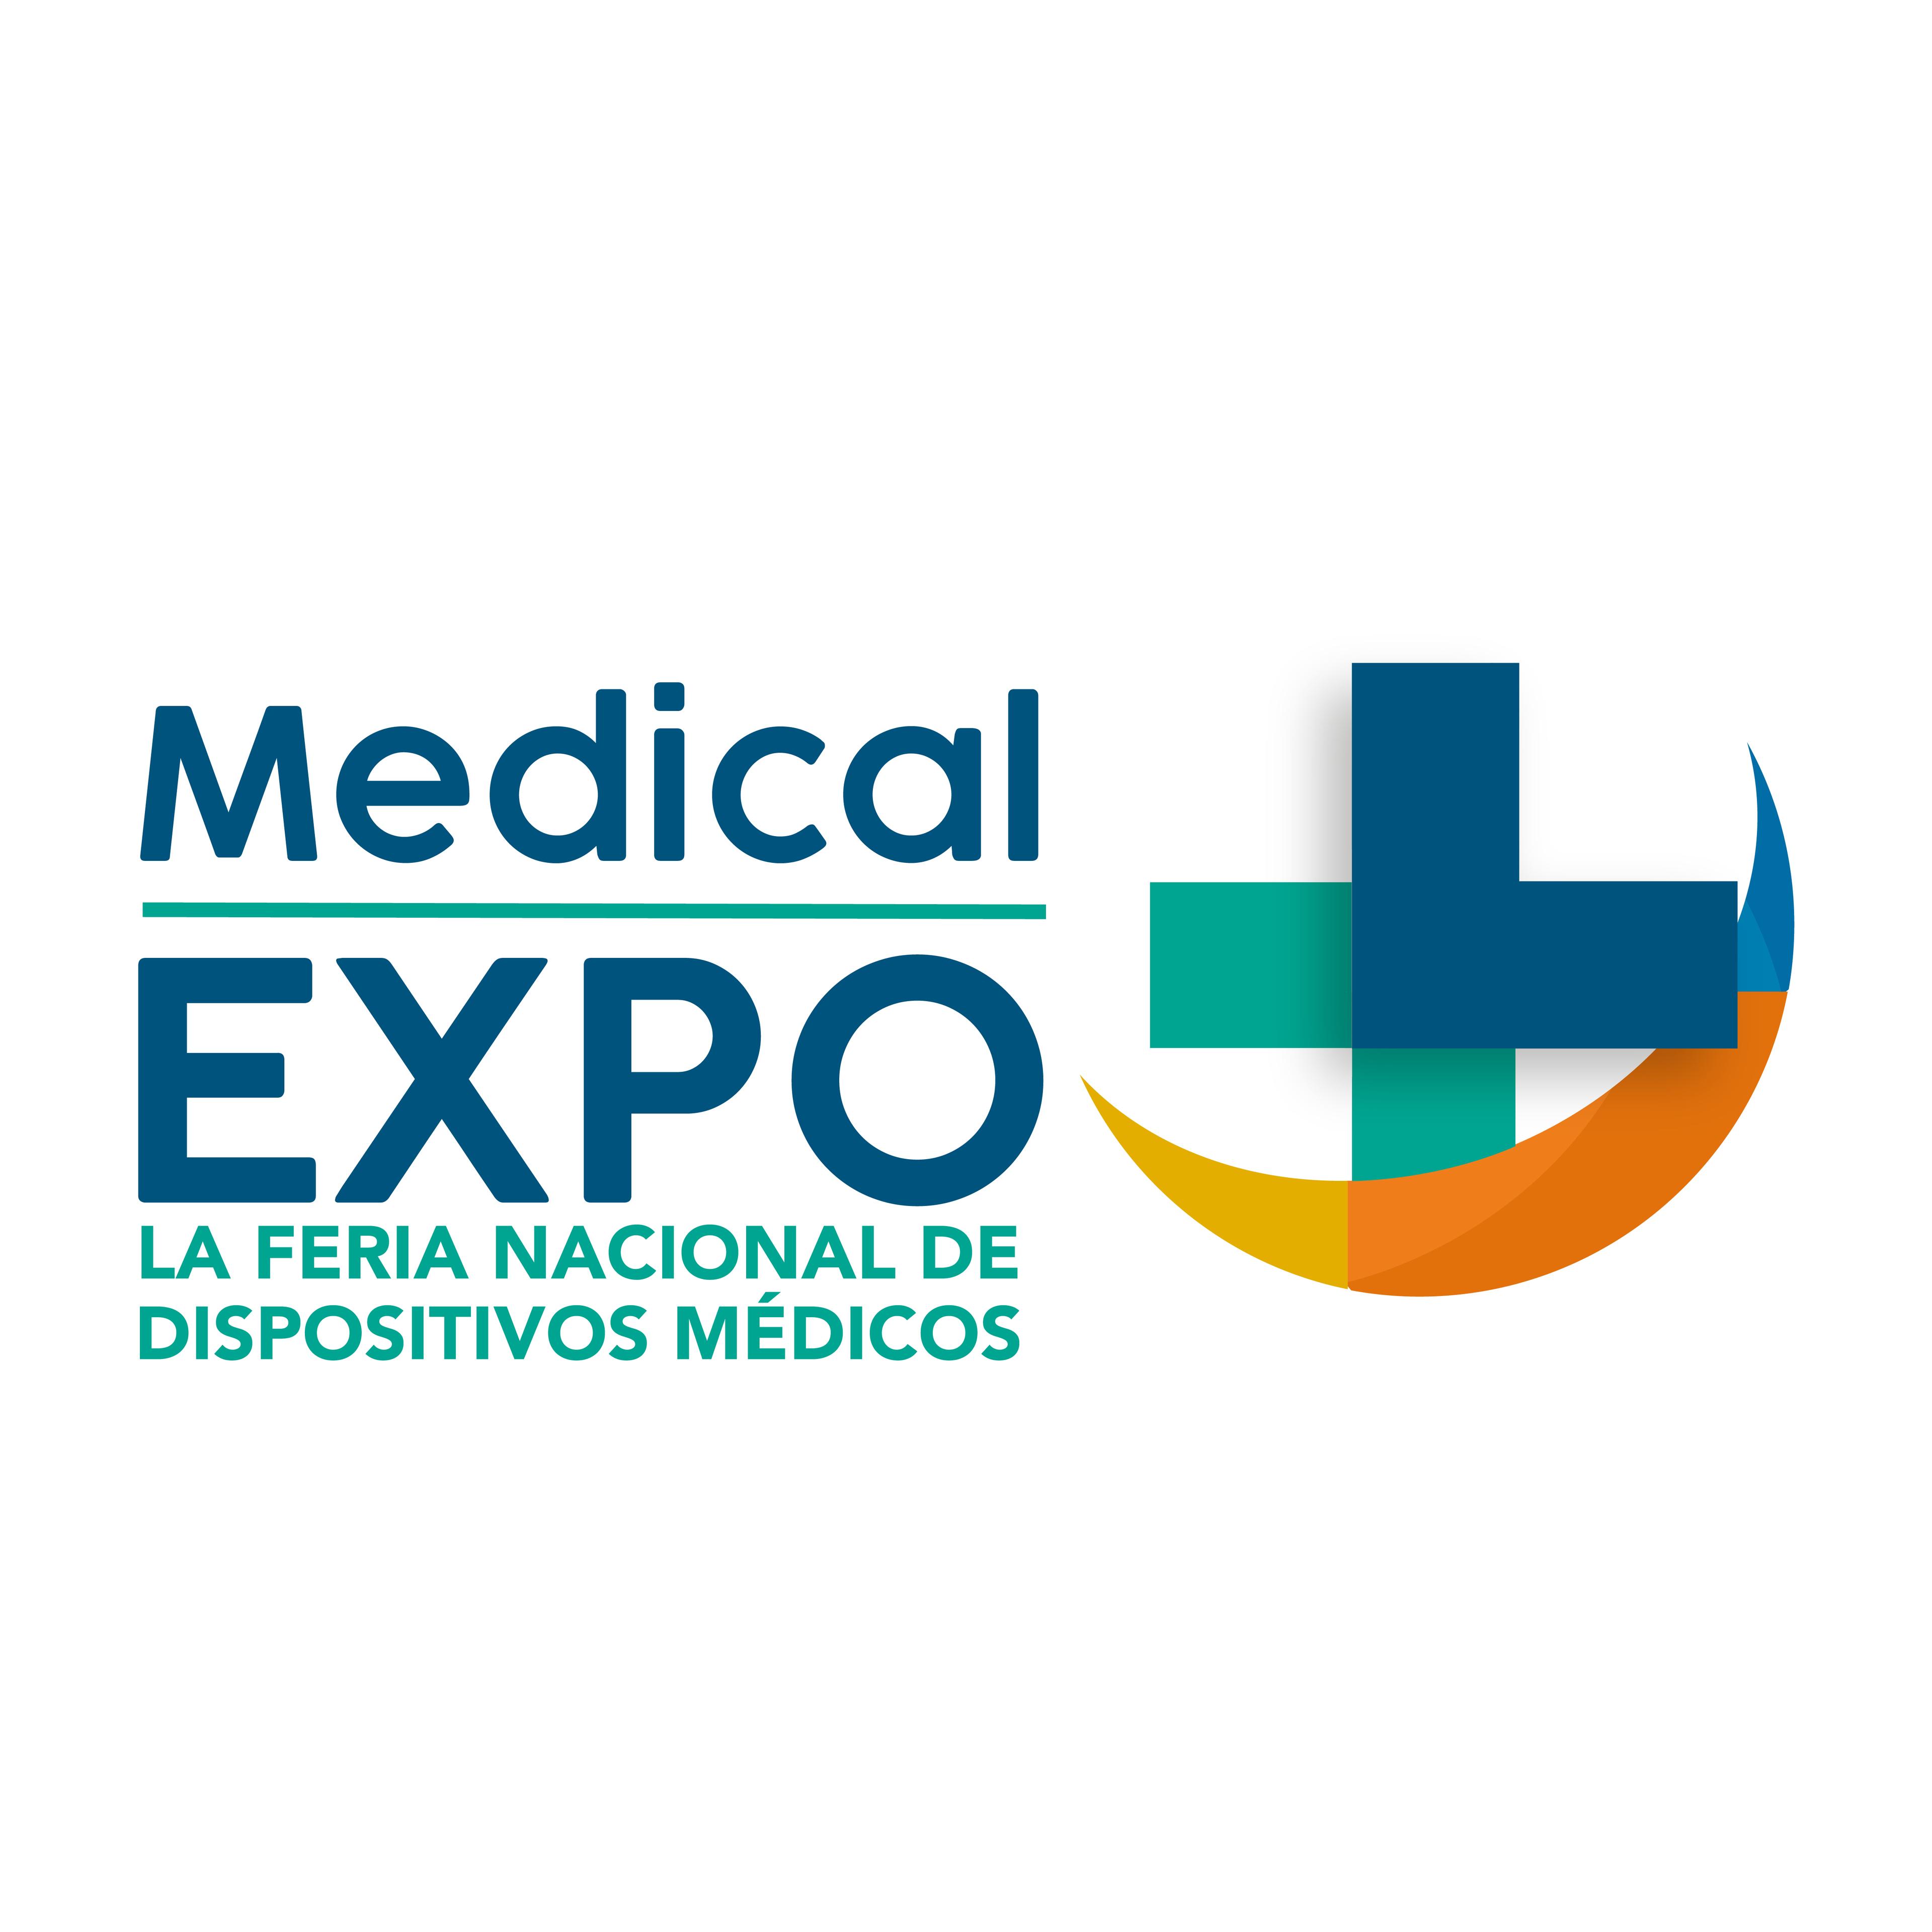 Medical Expo